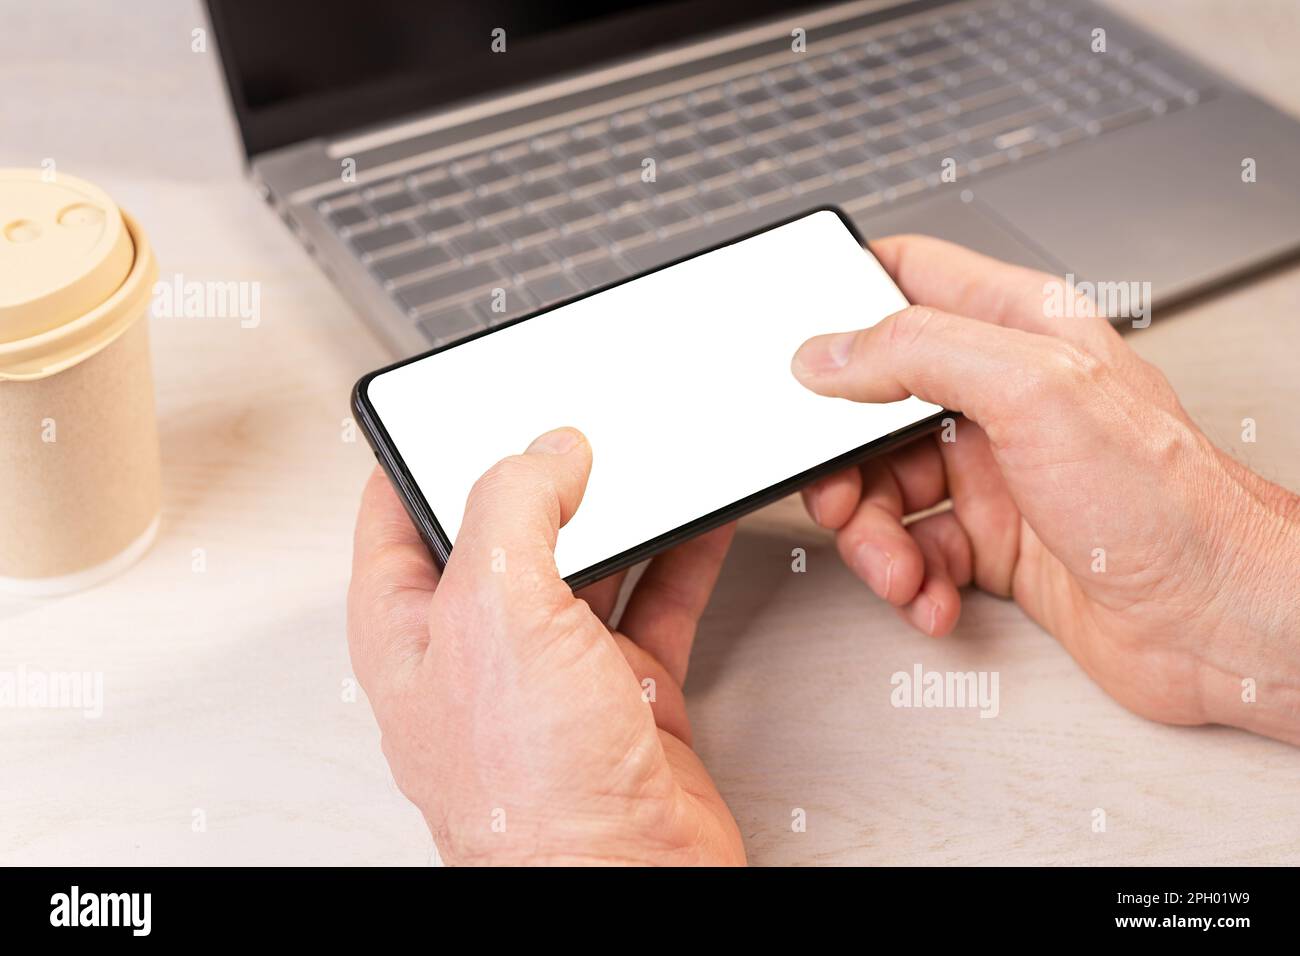 Thumb fingers on smartphone screen on mobile phone mockup, playing game at workplace, office desk. Stock Photo